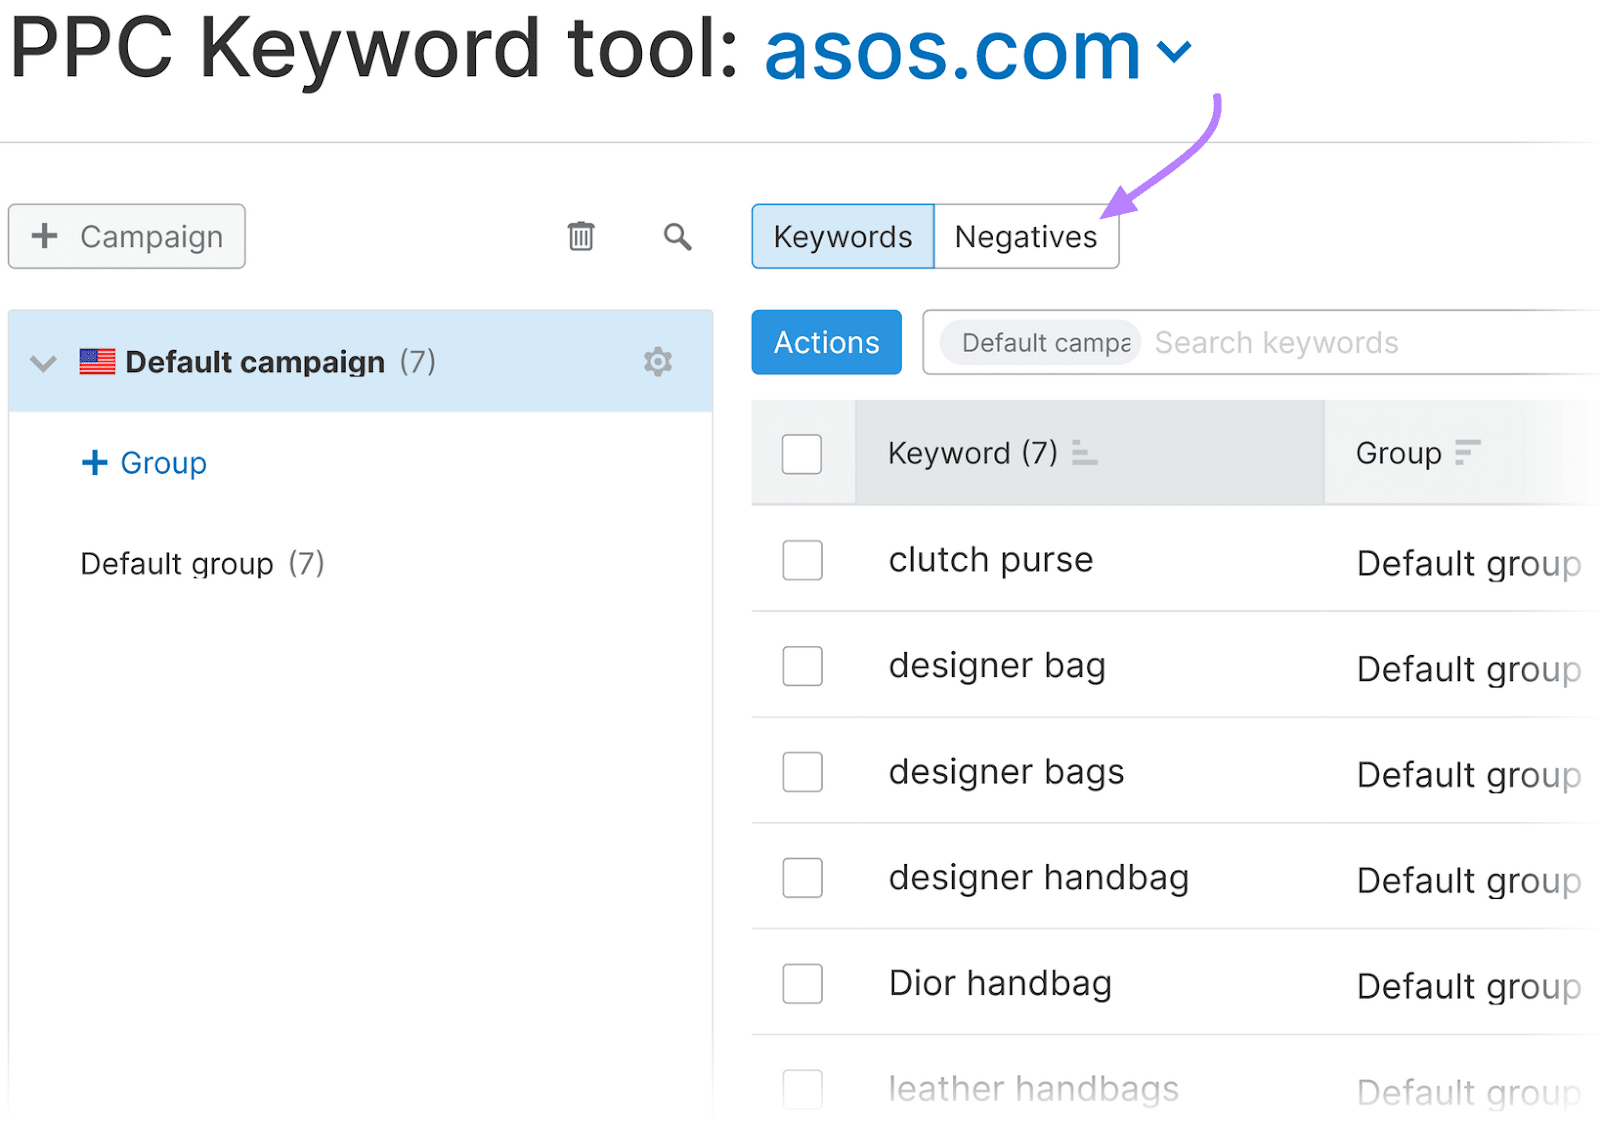 PPC Keyword Tool interface for asos.com showing the "Negatives" tab, highlighted with a purple arrow.